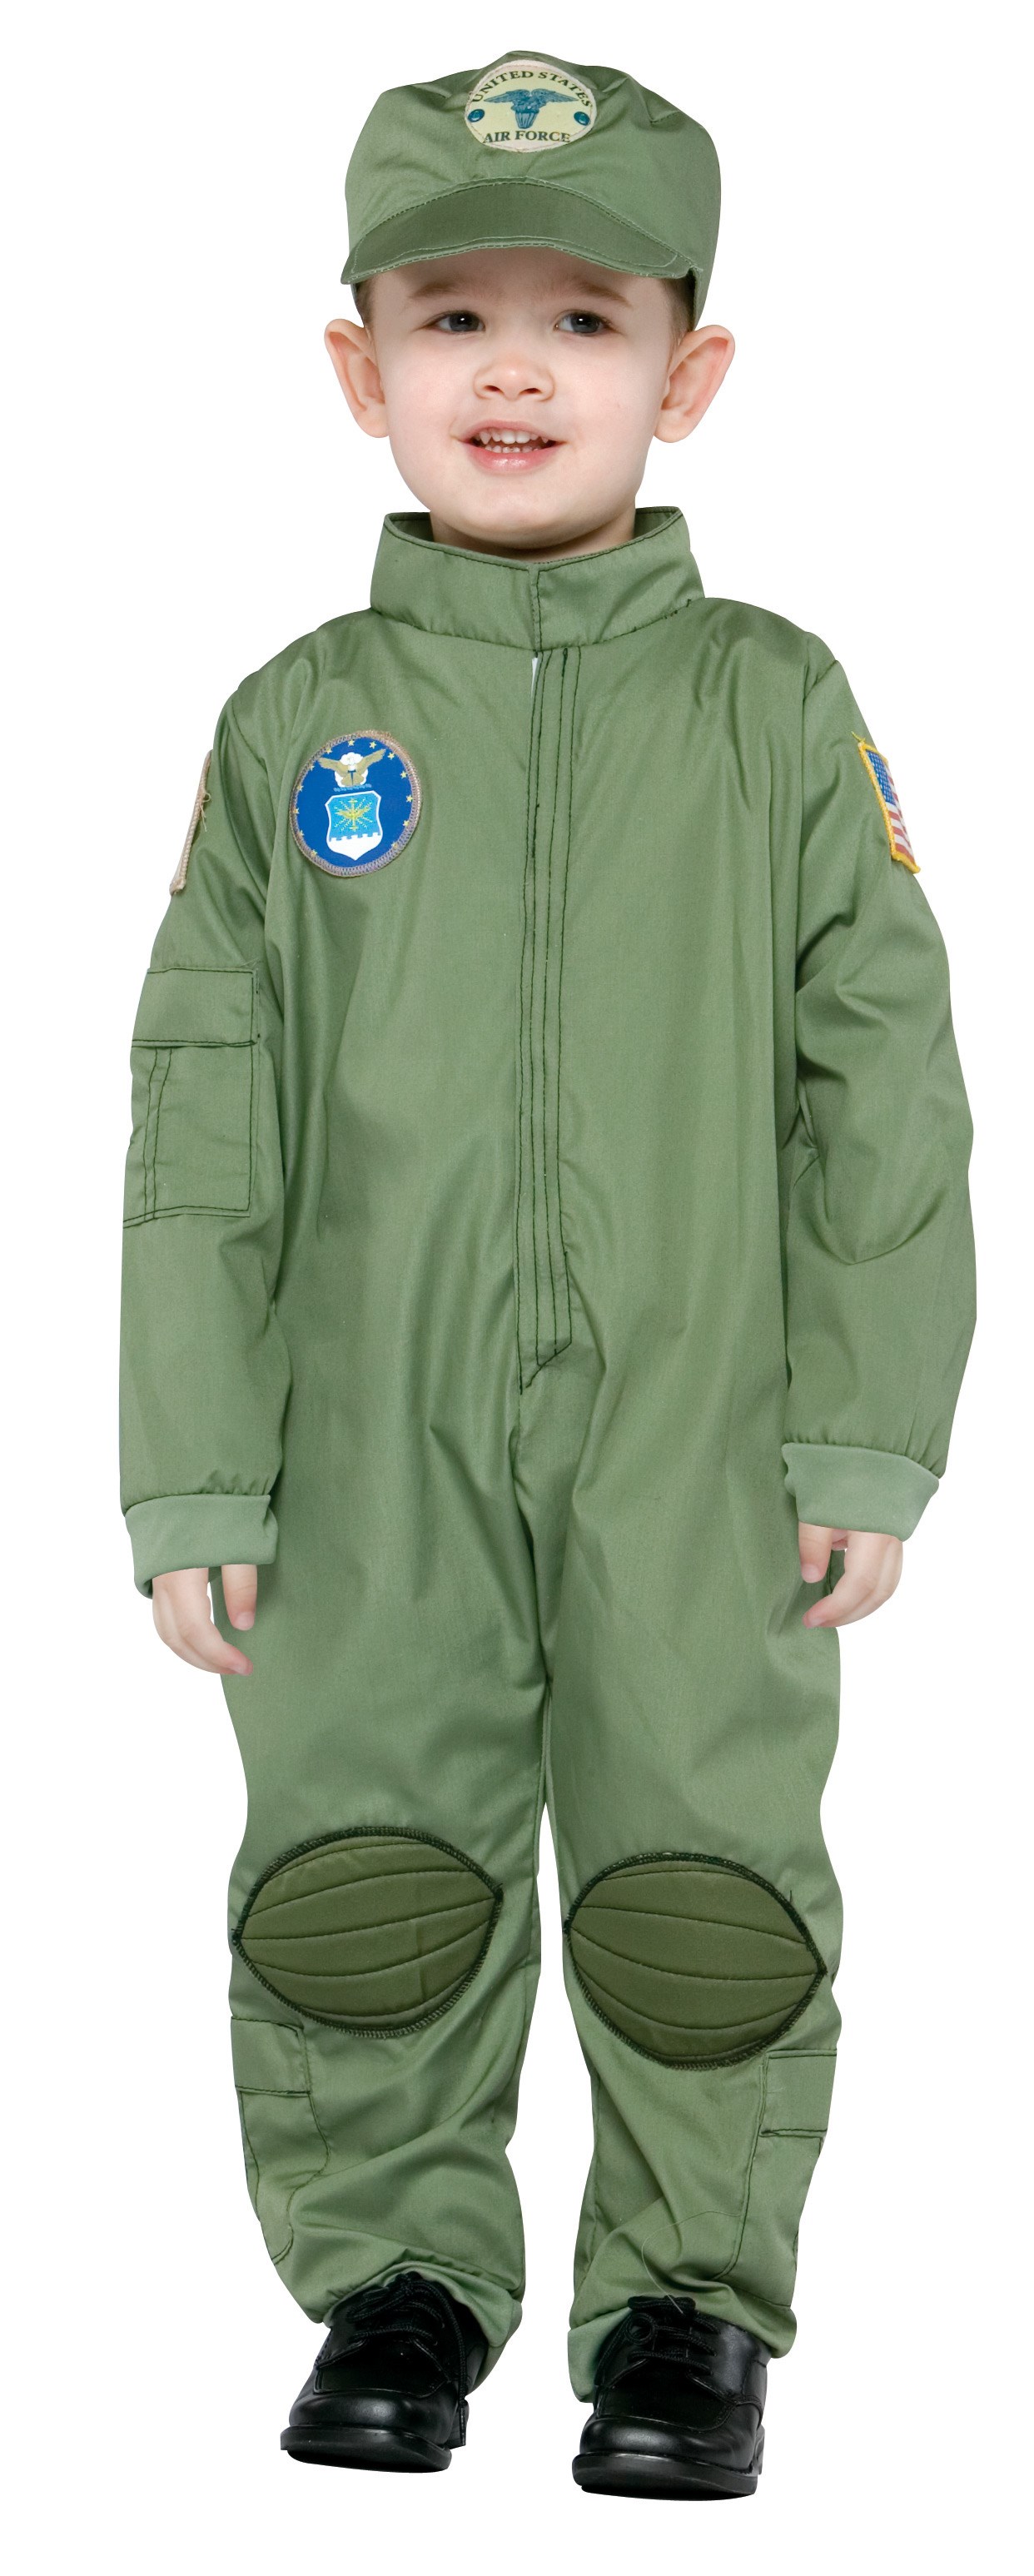 Air Force Uniform Toddler Costume | BuyCostumes.com